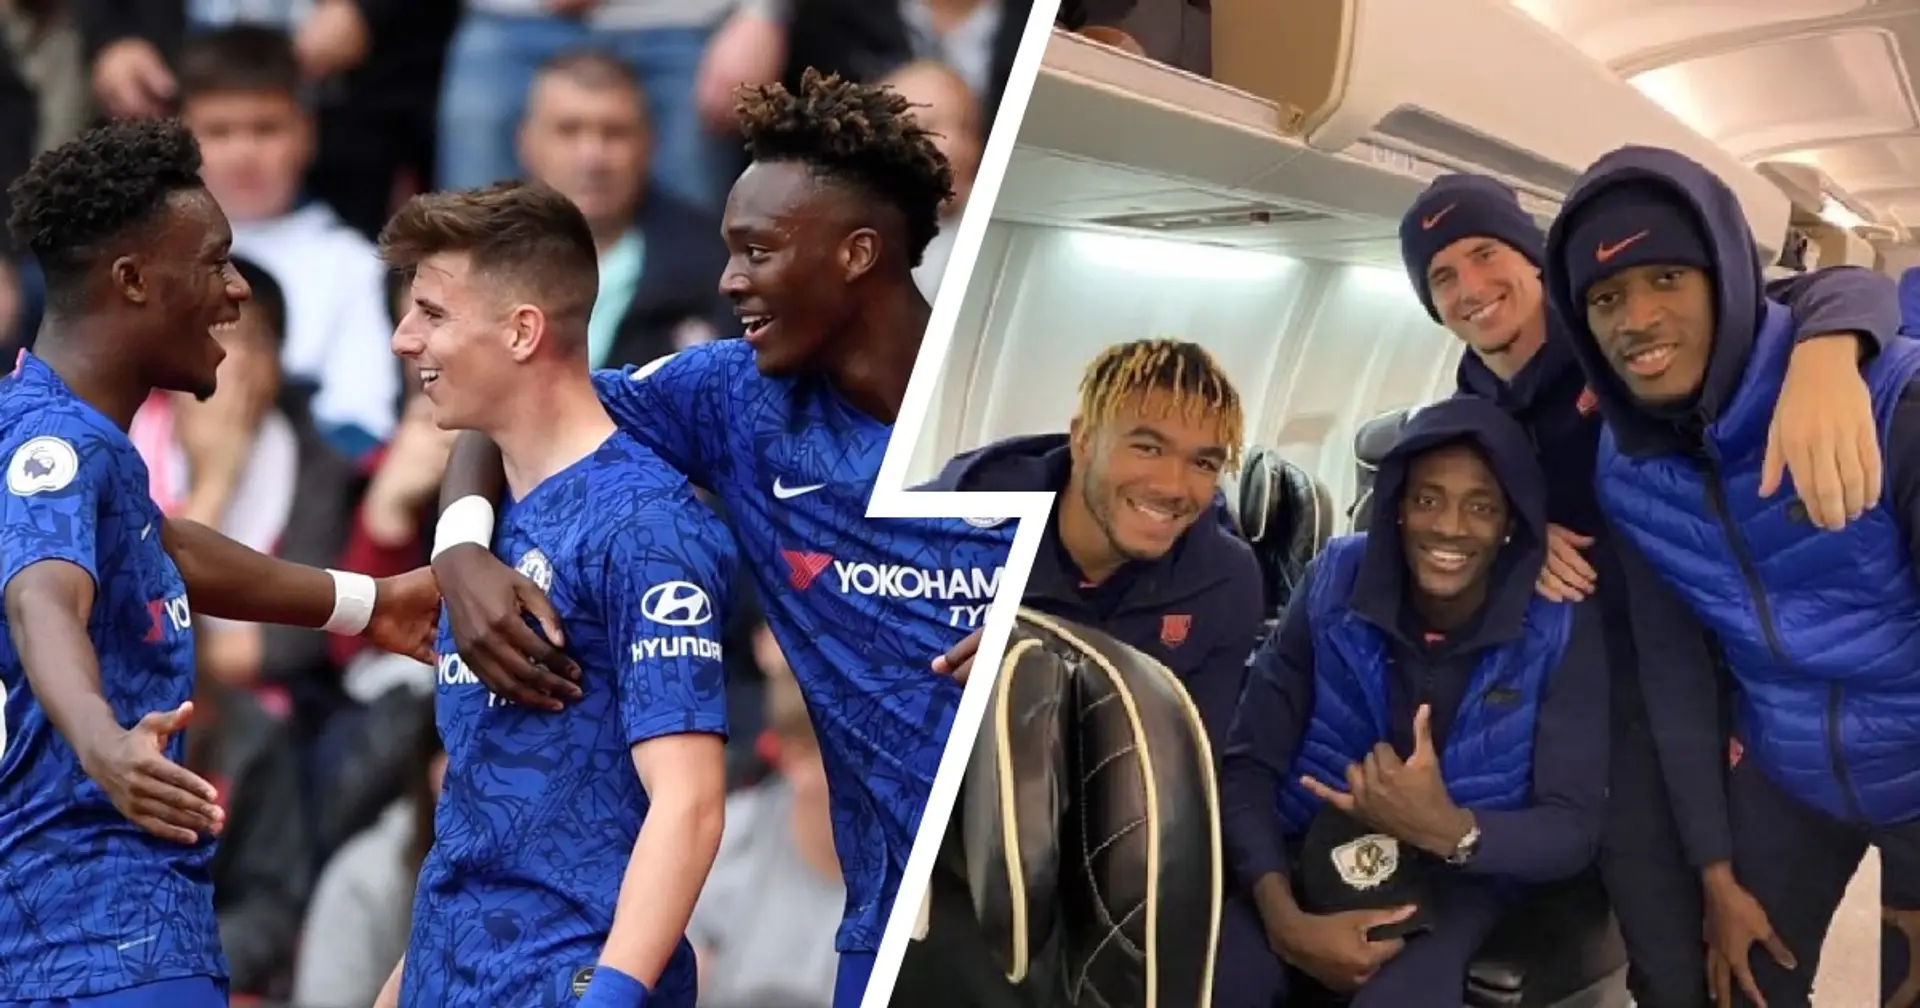 'Around £300m easily': fans discuss how much Chelsea's young stars are worth